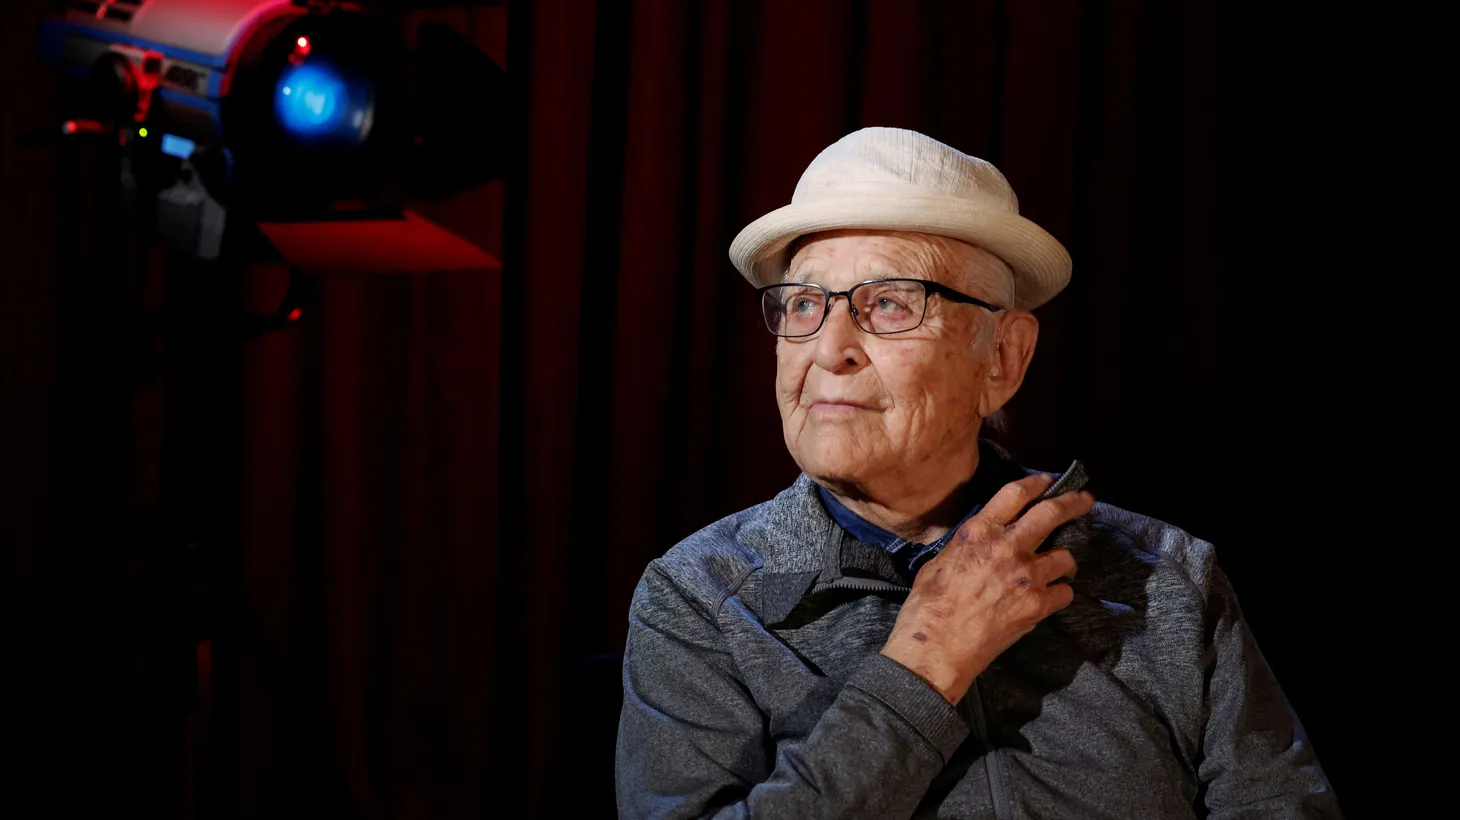 Television producer Norman Lear poses for a portrait in New York, U.S., October 12, 2016.